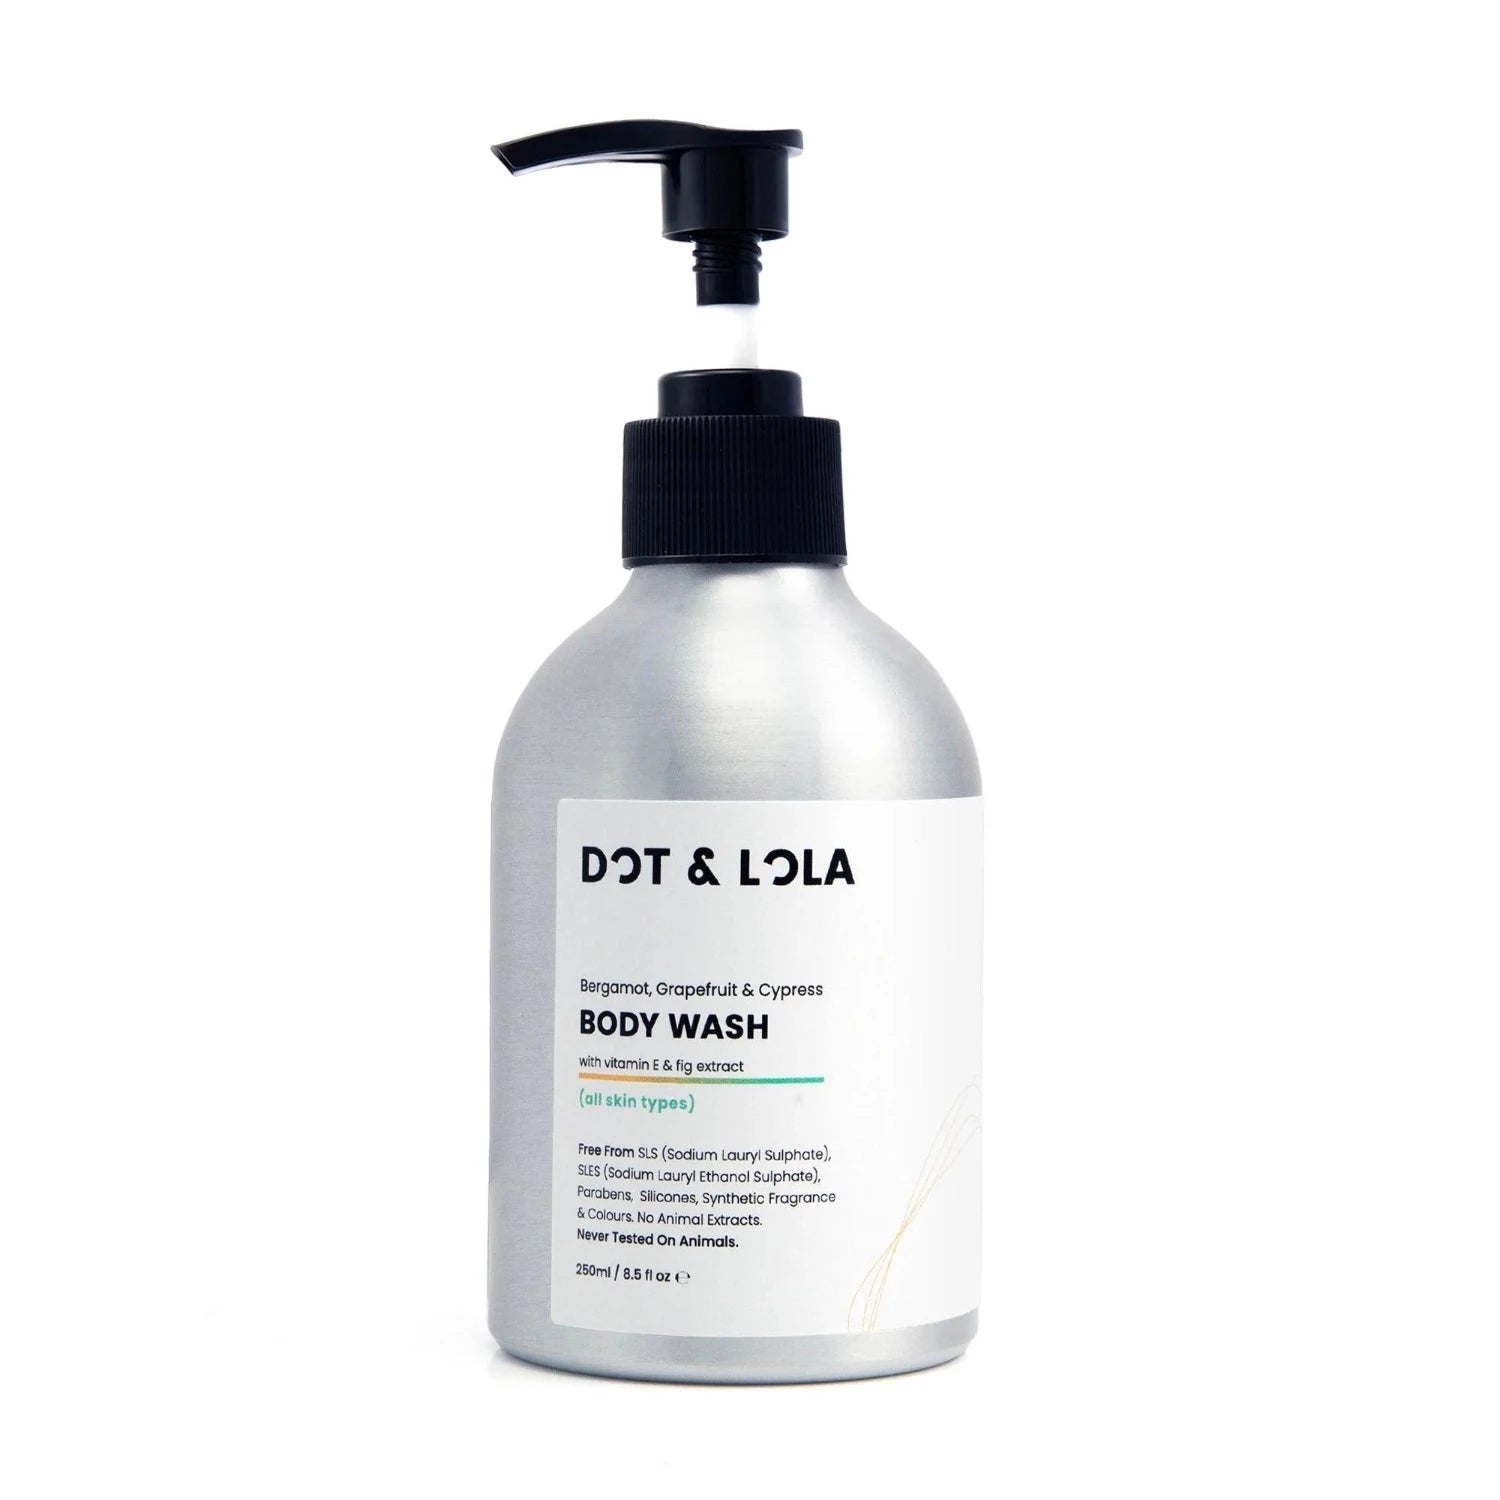 DOT & LOLA Body Wash With Bergamot, Grapefruit & Cypress is completely free of SLS, parabens, animal extracts, and synthetic fragrances and colours, it offers a chemical-free cleansing experience.